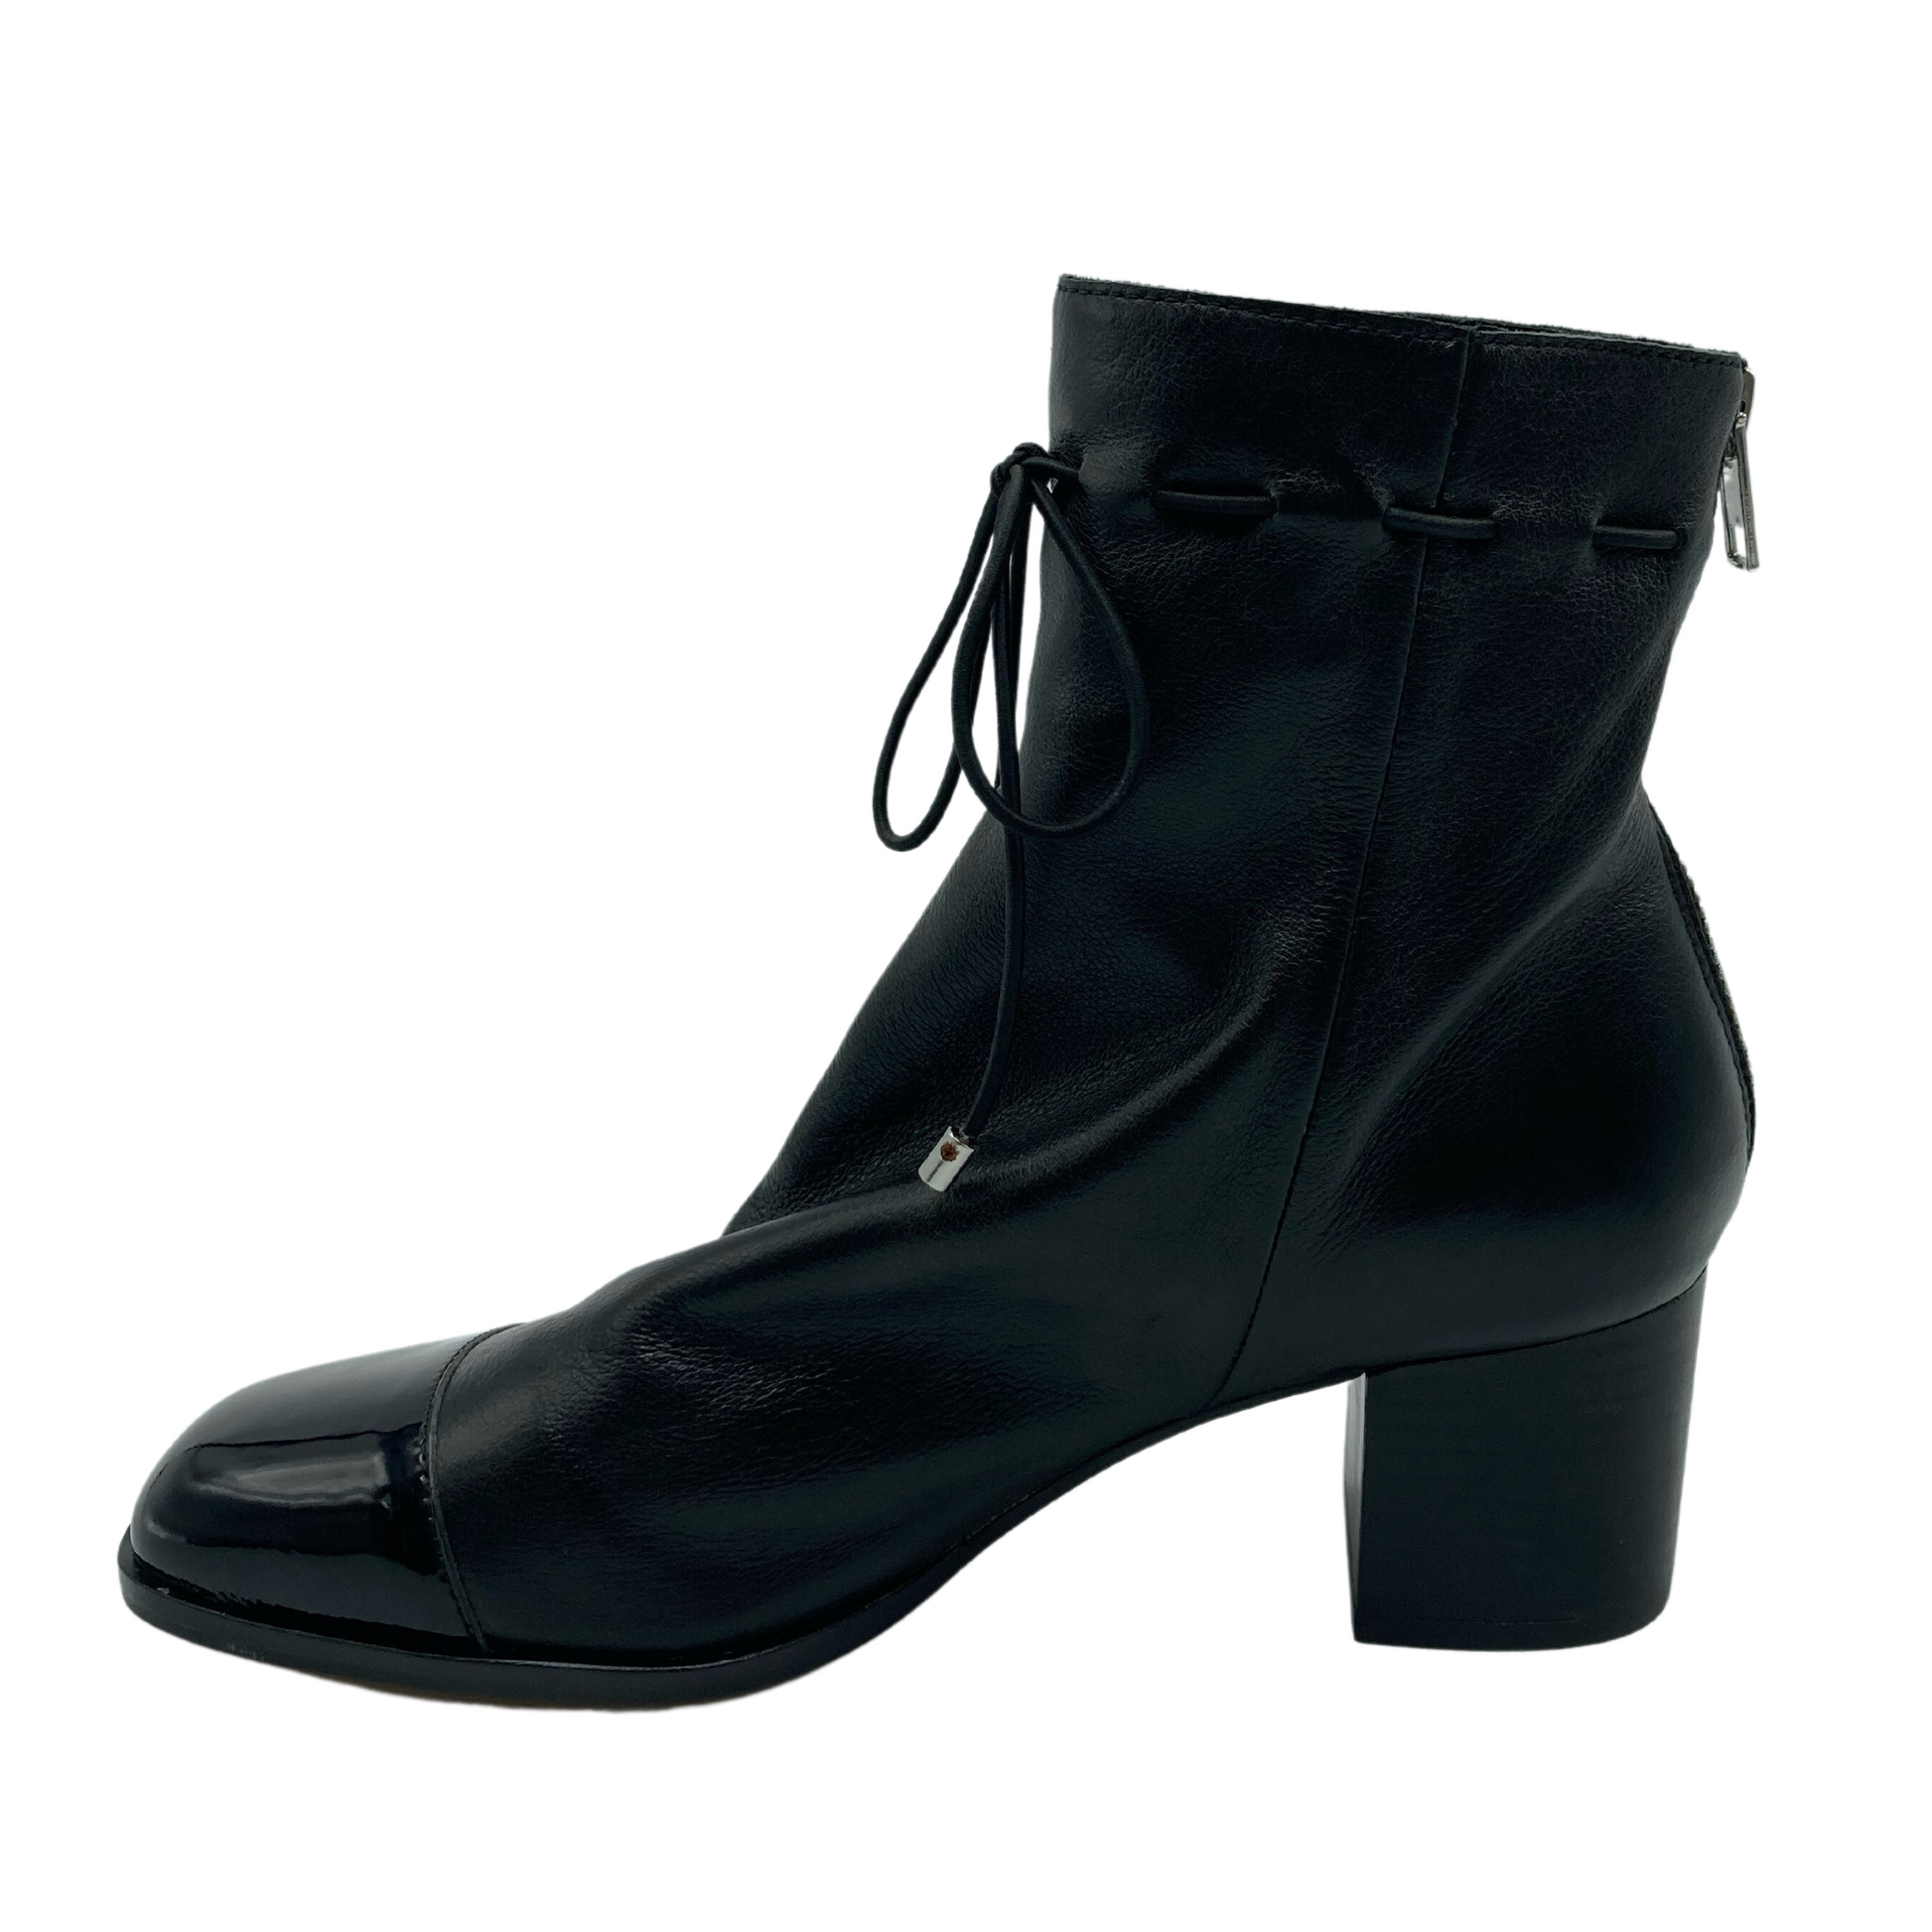 Left facing view of black leather ankle boot with zipper closure and thin ankle tie.